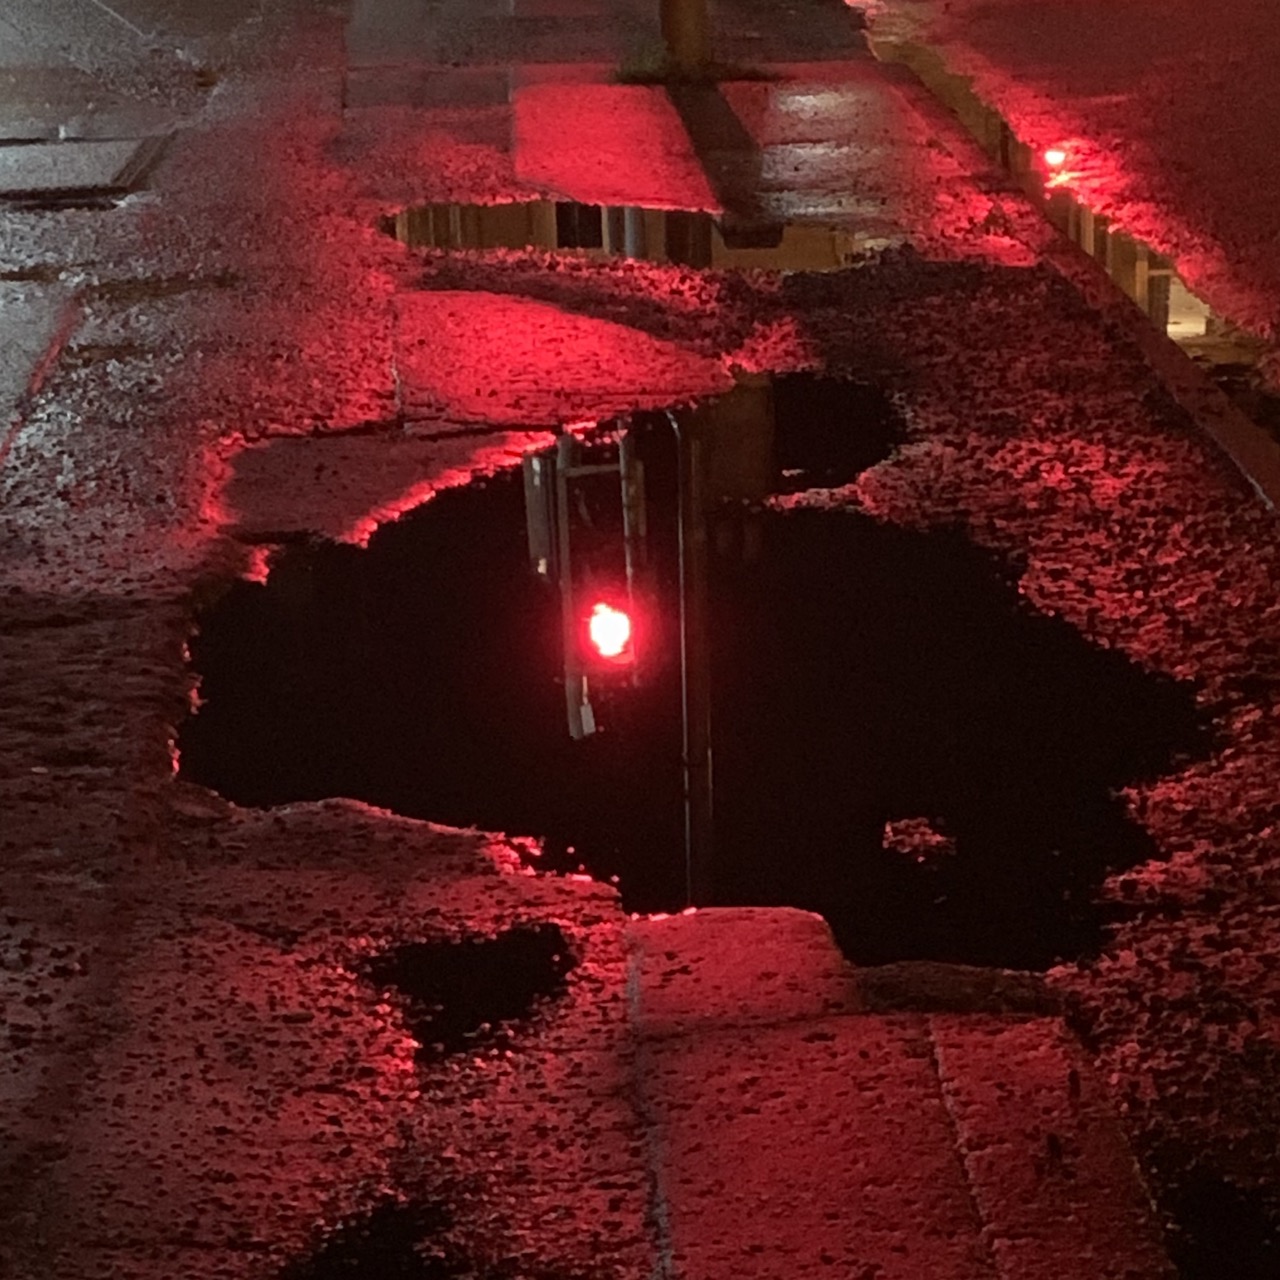 Stoplight at night reflected in puddle